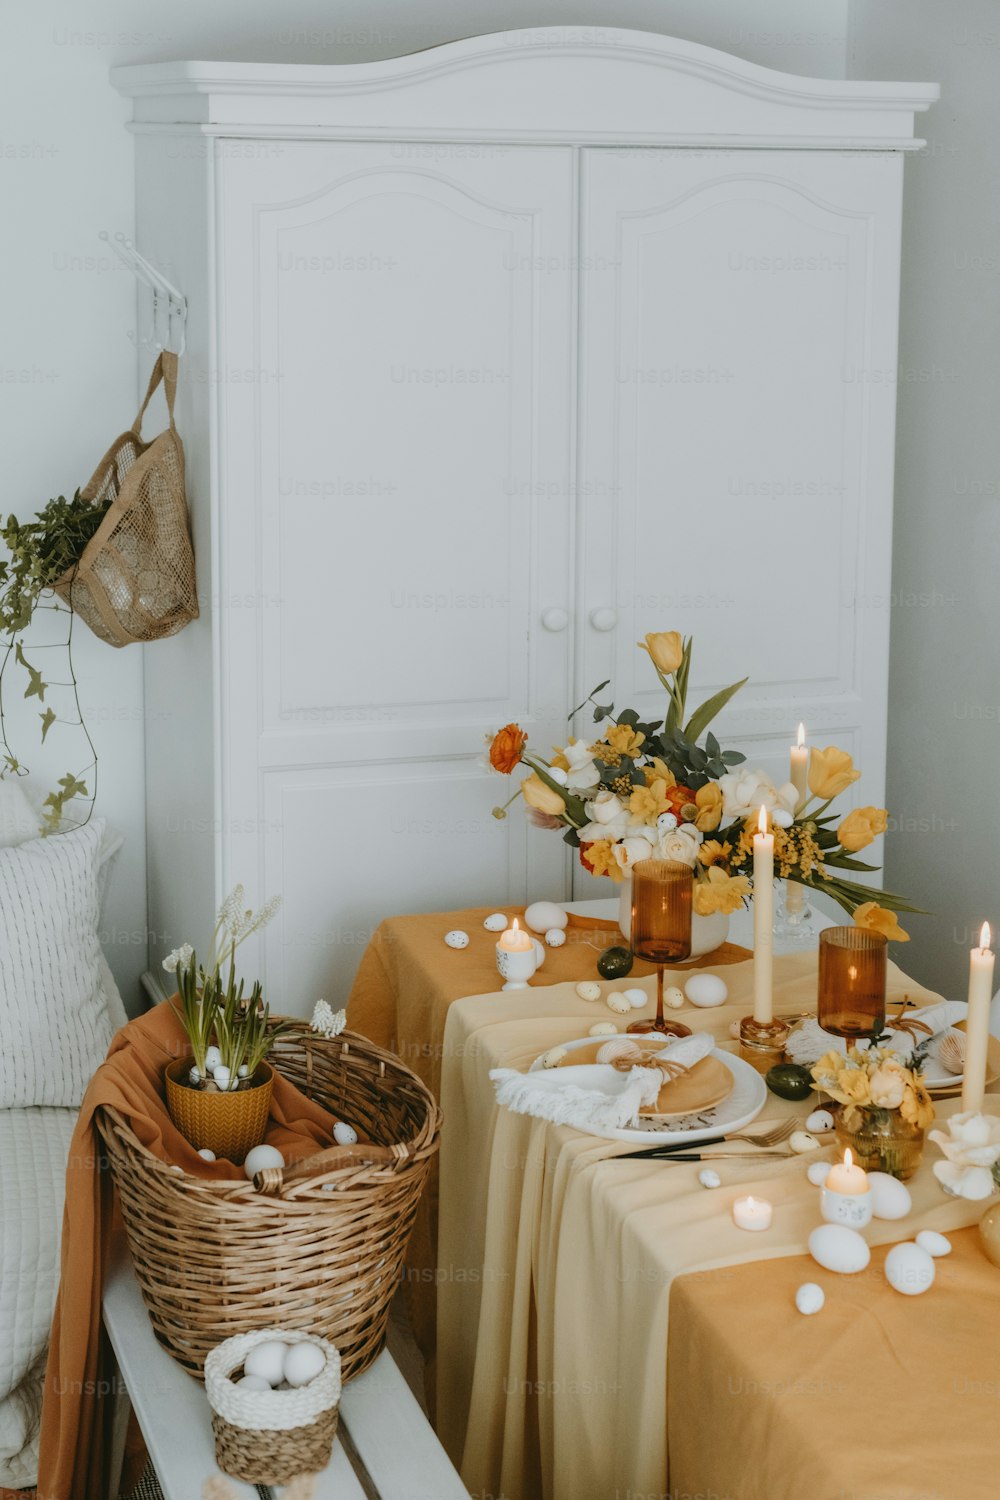 a table with a basket of flowers and candles